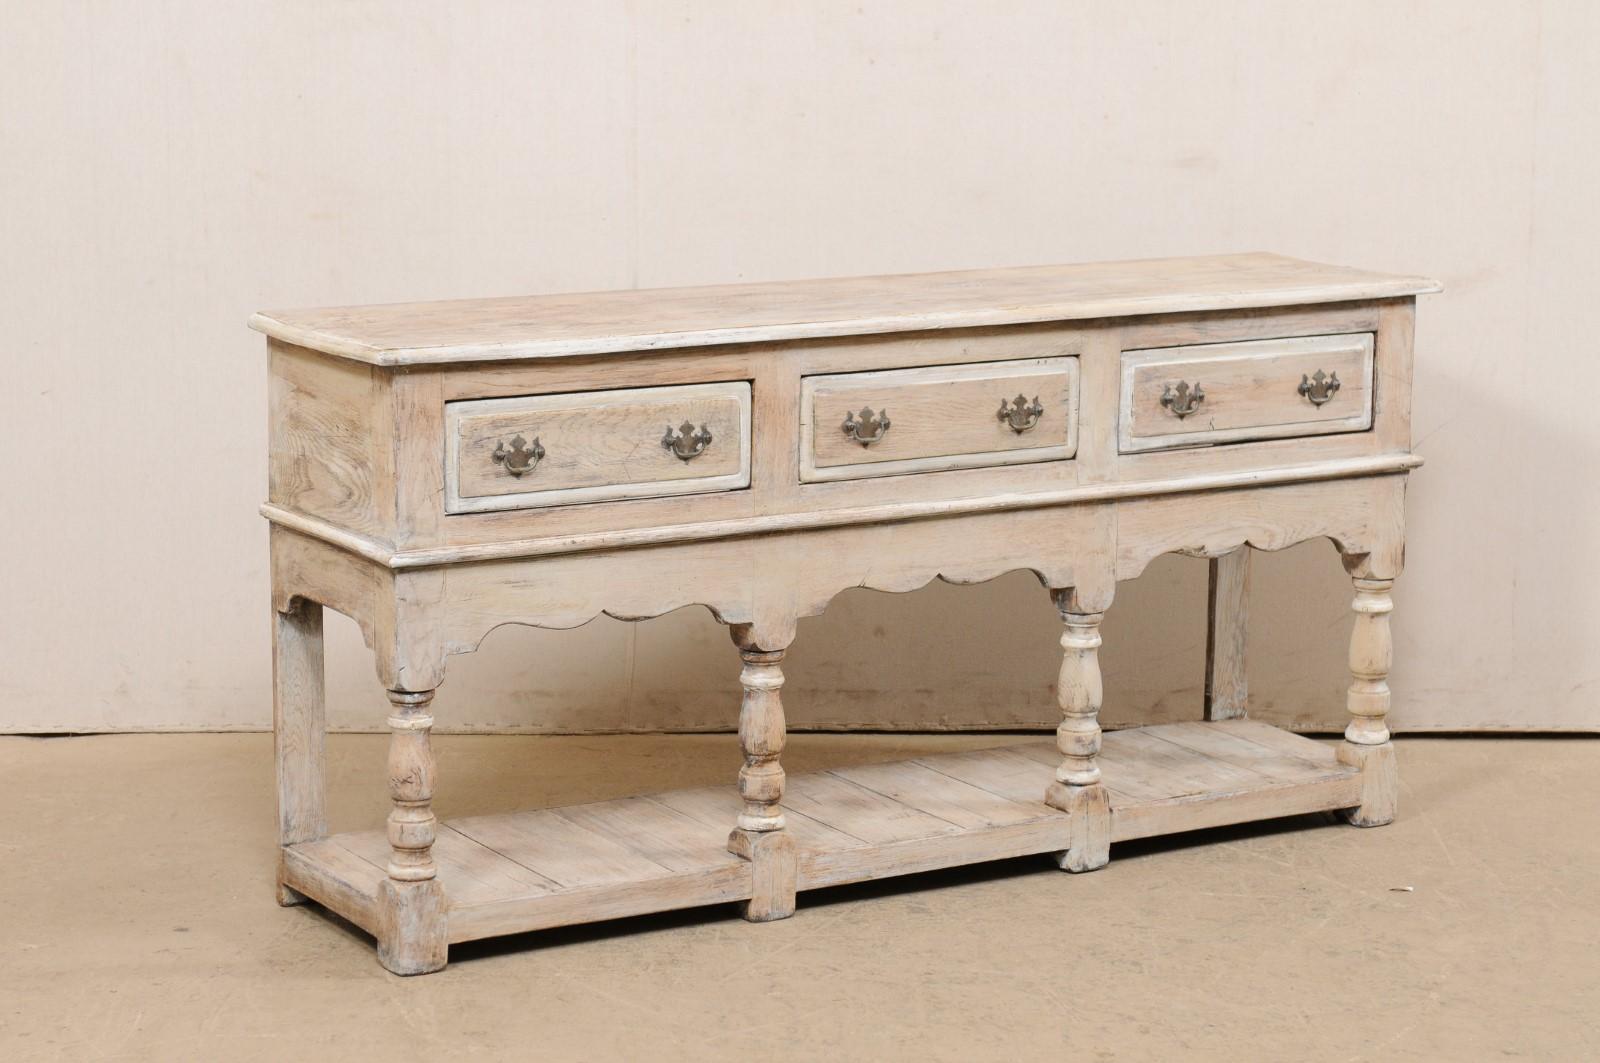 An English carved and painted wood console table, with drawers and lower shelf, from the 19th century. This antique table from England features a rectangular-shaped top over a case which houses three raised-panel drawers, set horizontally along the